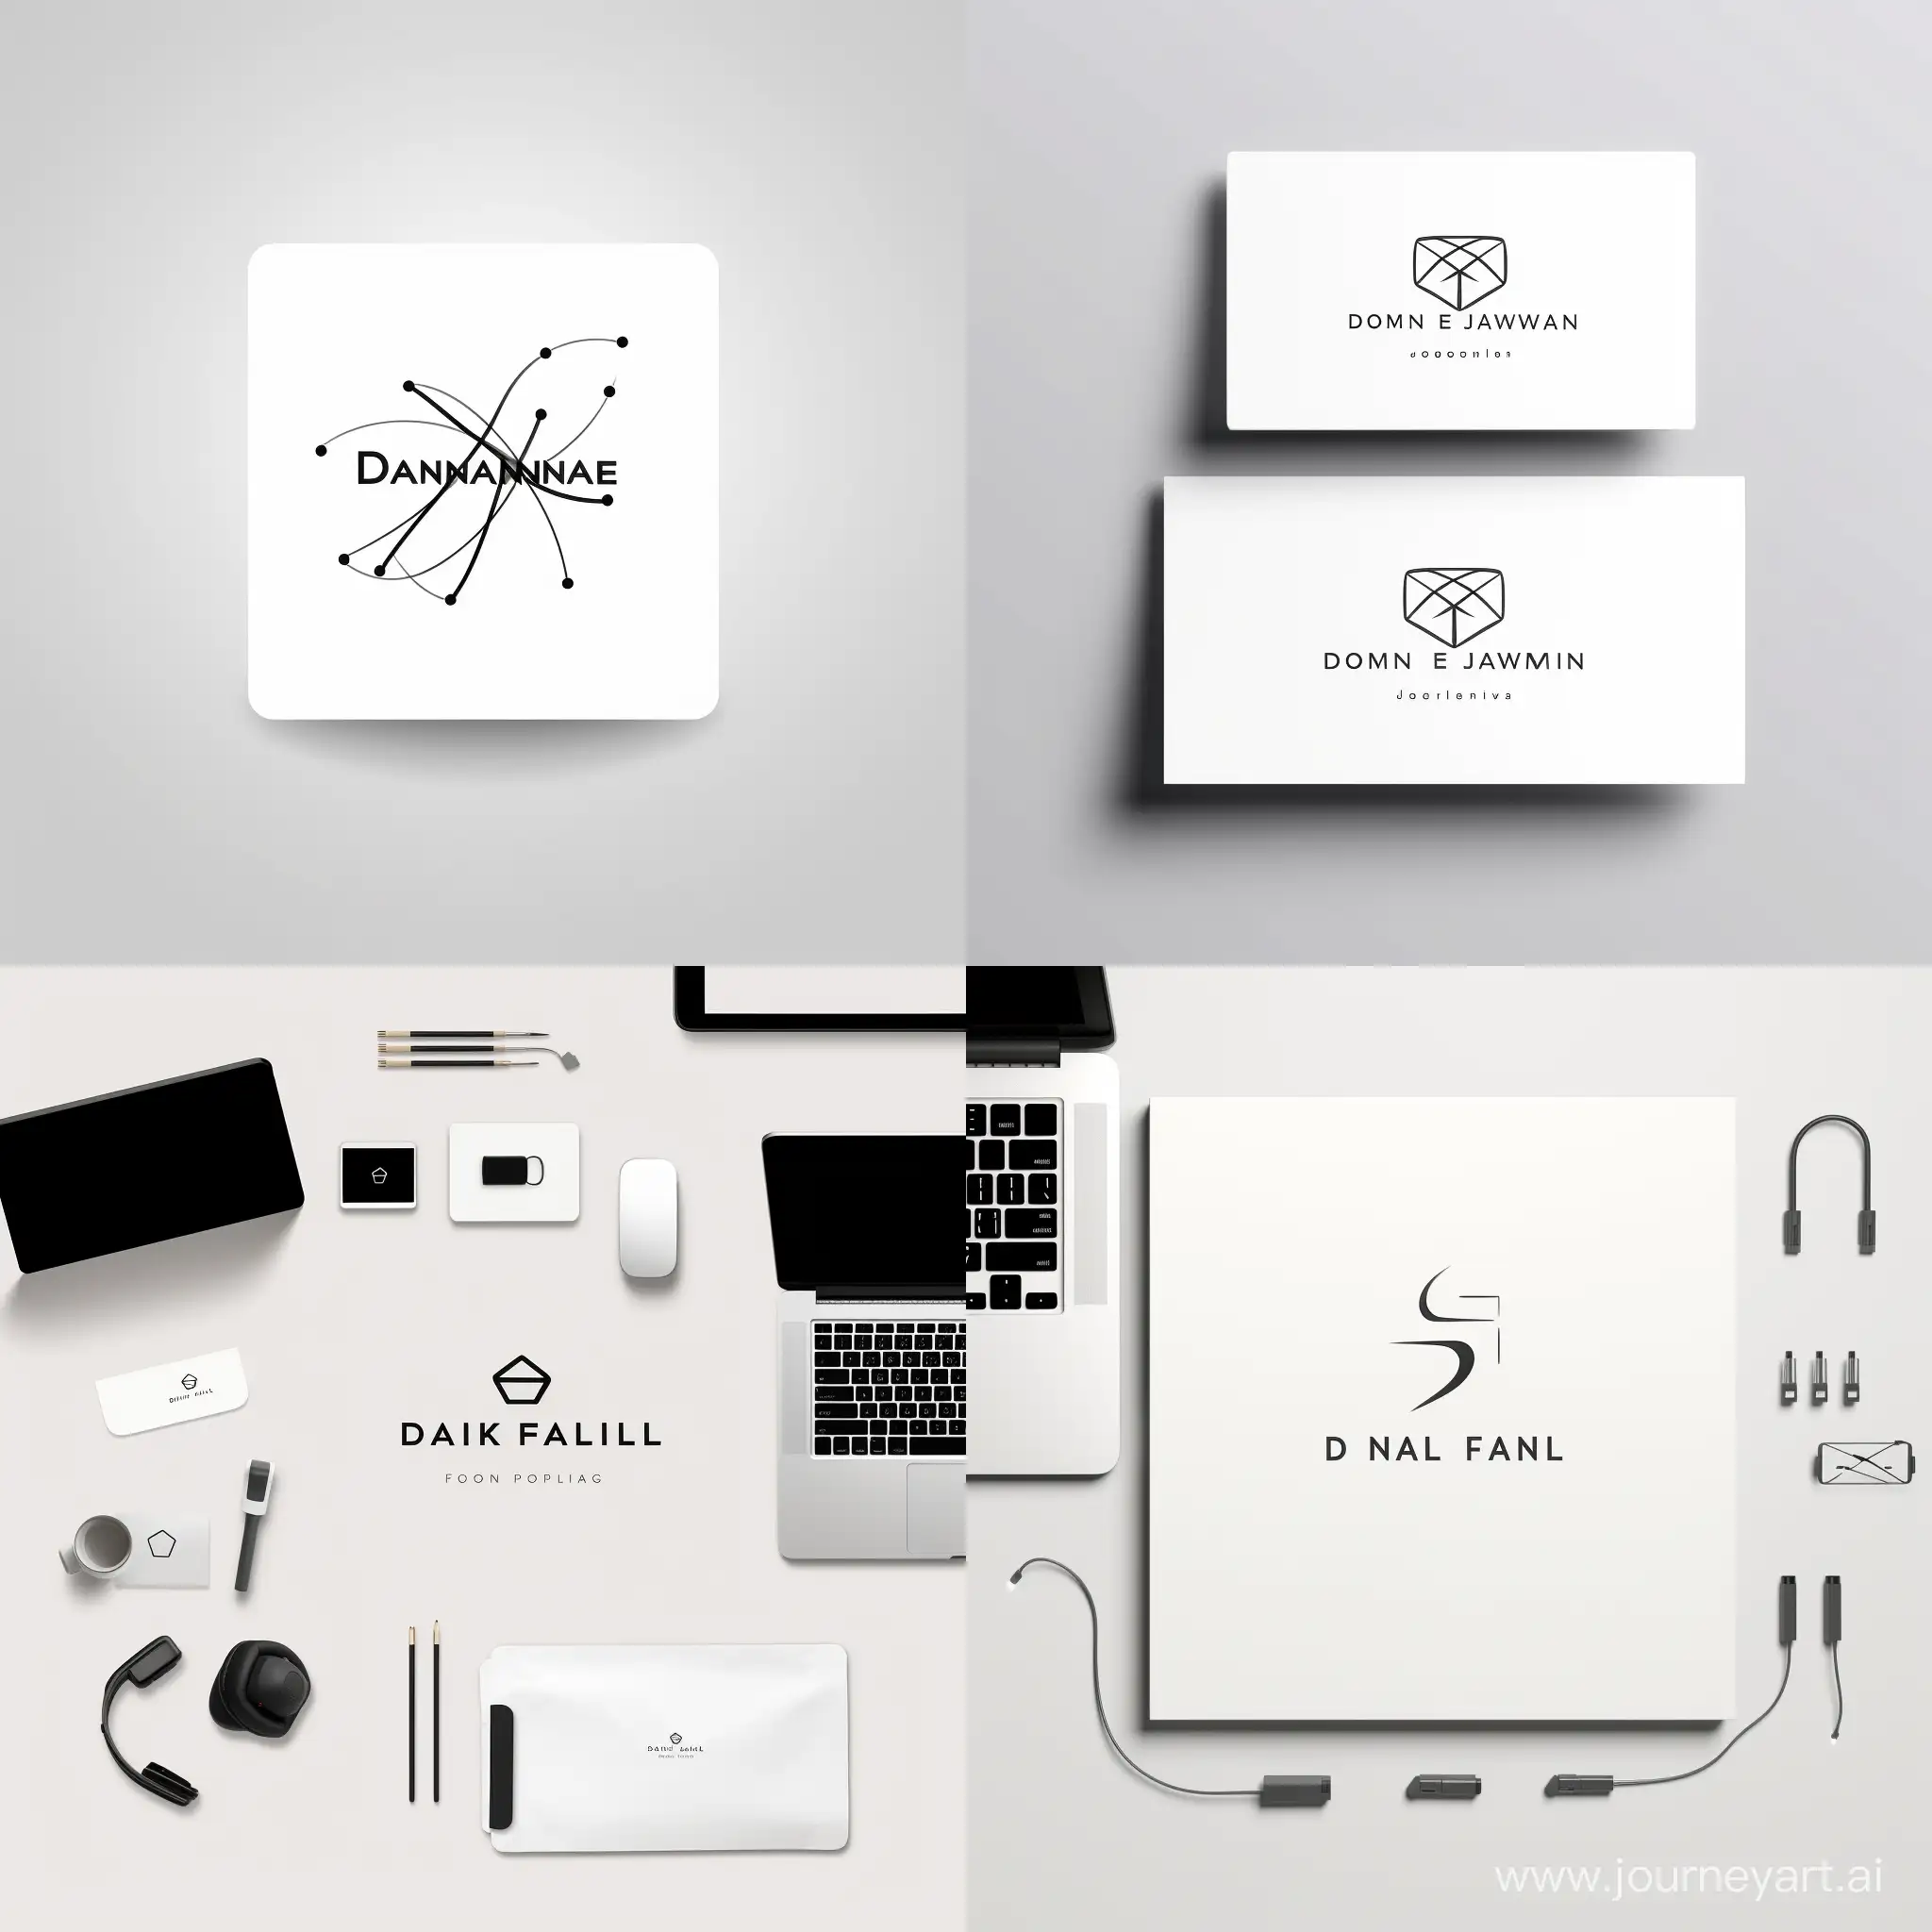 create a logo with white  background for a tech company, black and white with connections and deals